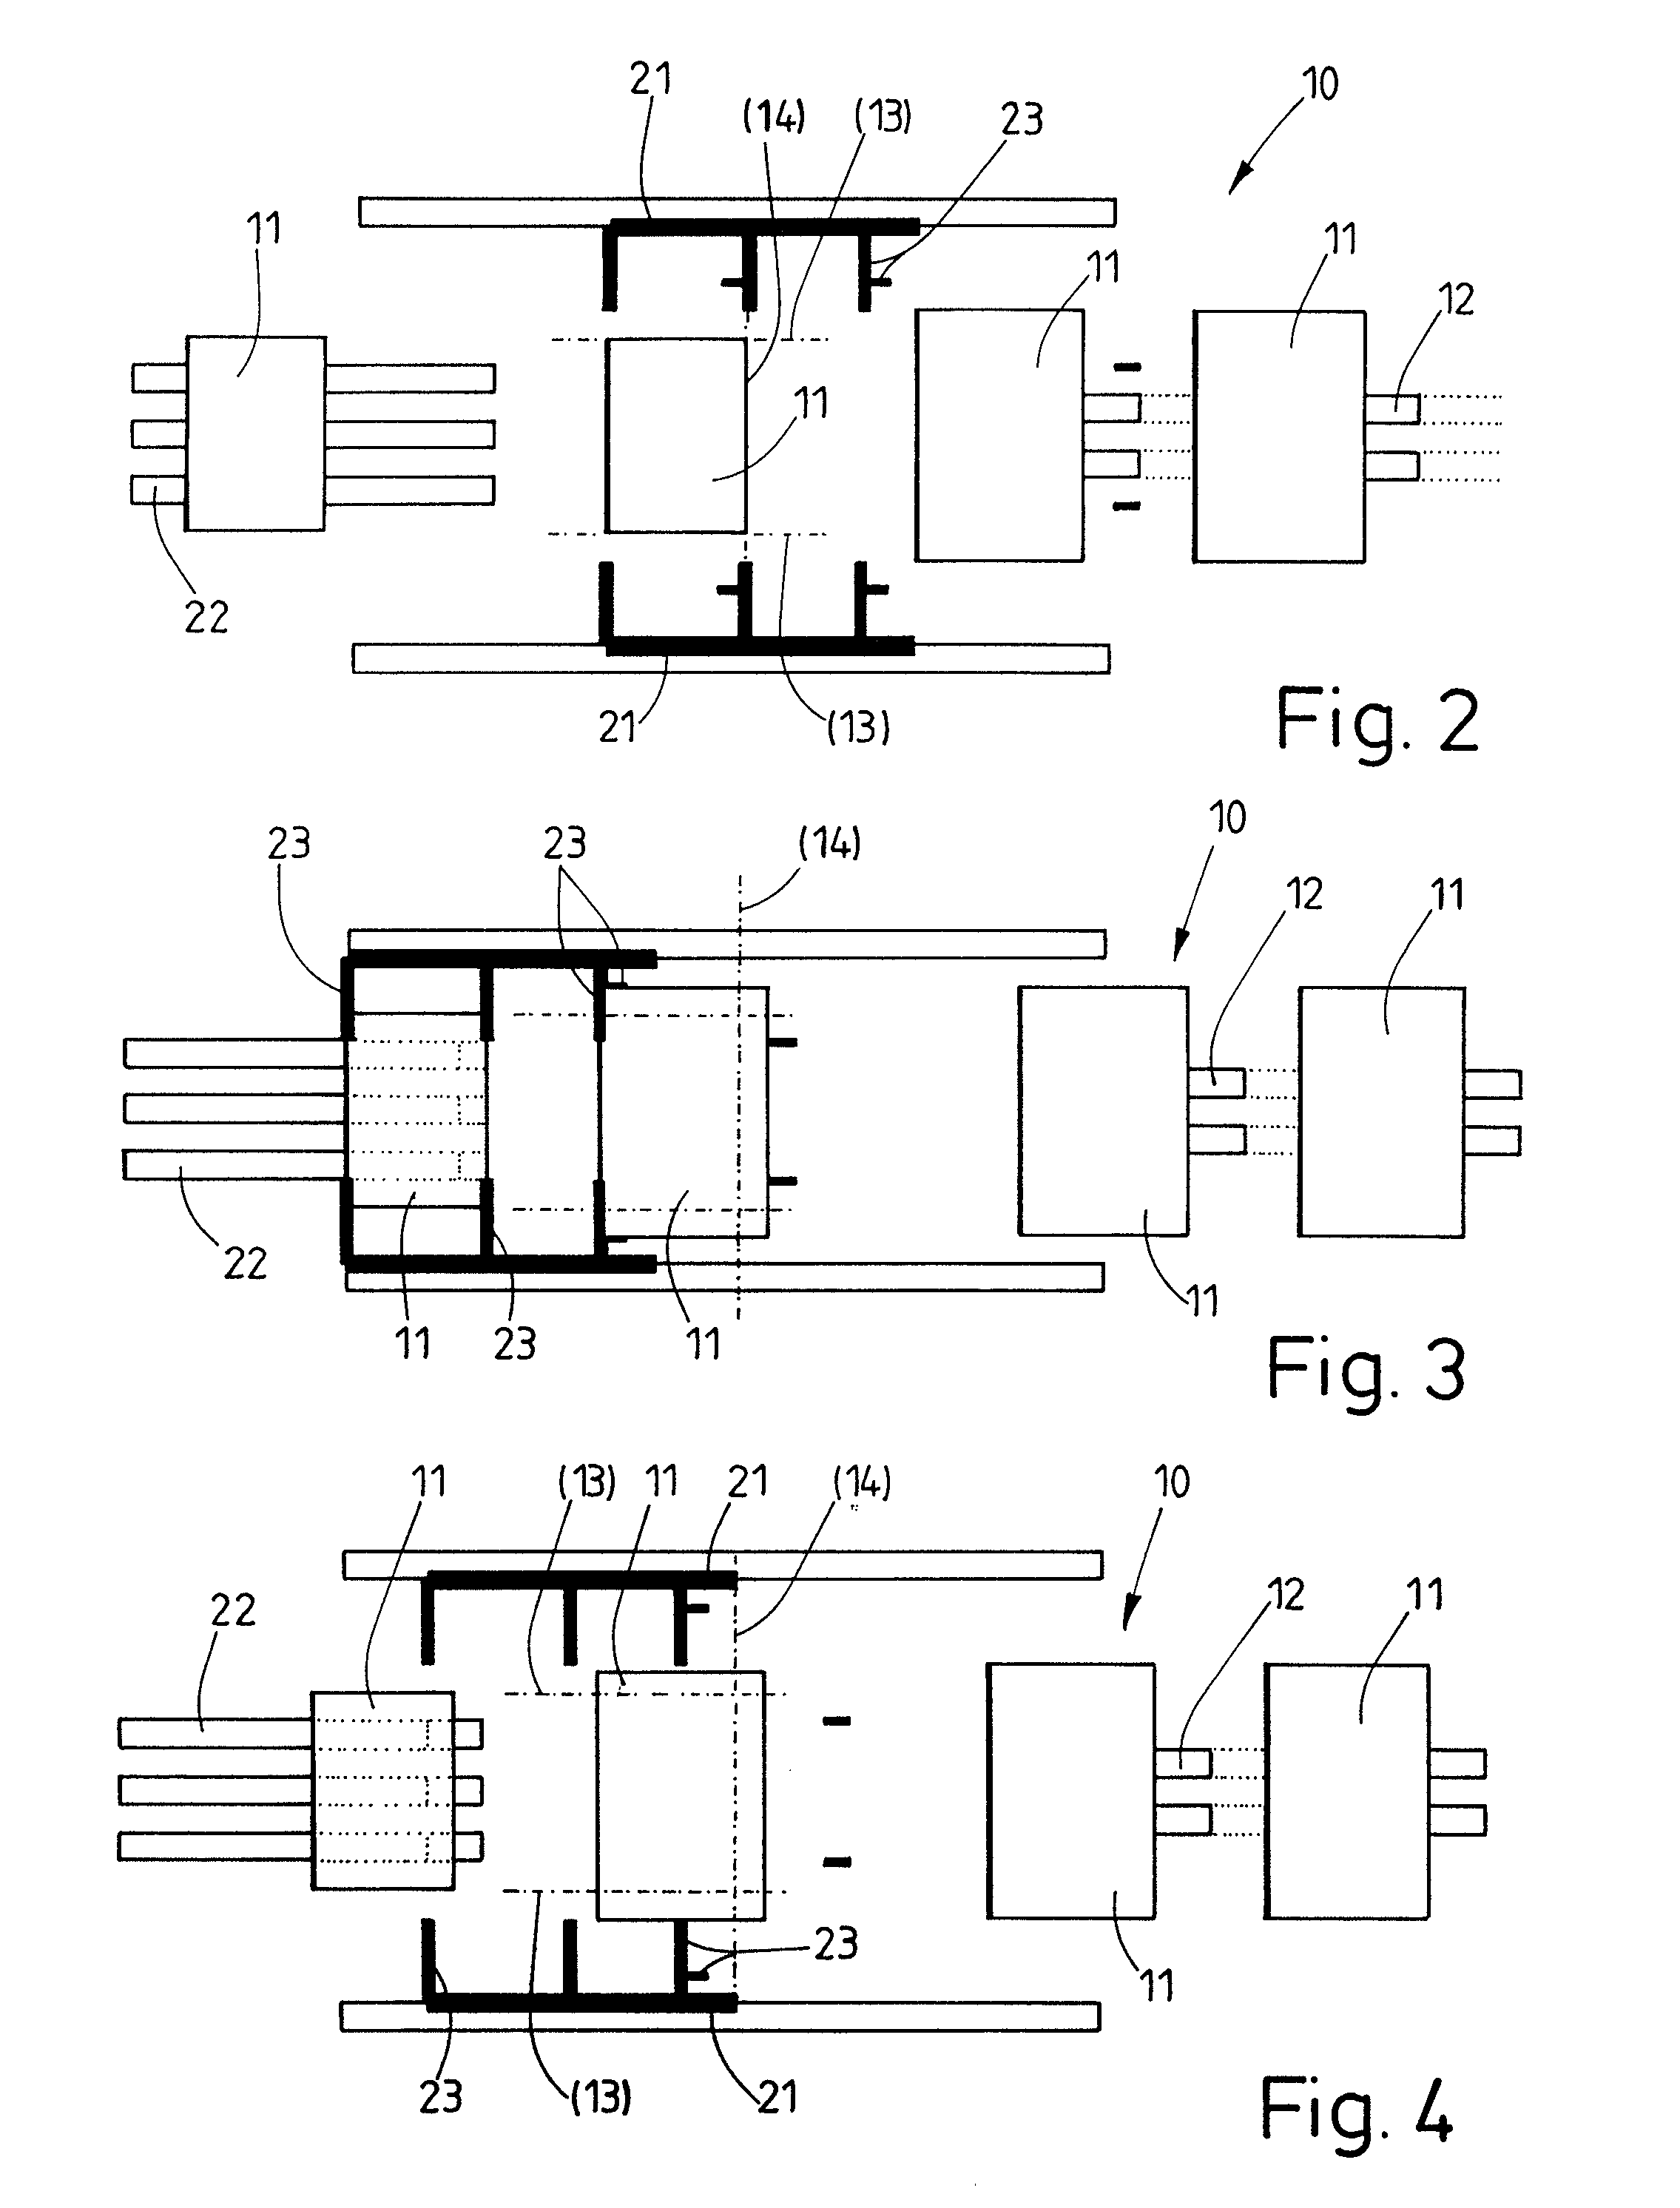 Method for converting a trimming machine for the preferably three-sided trimming of a stack of sheets